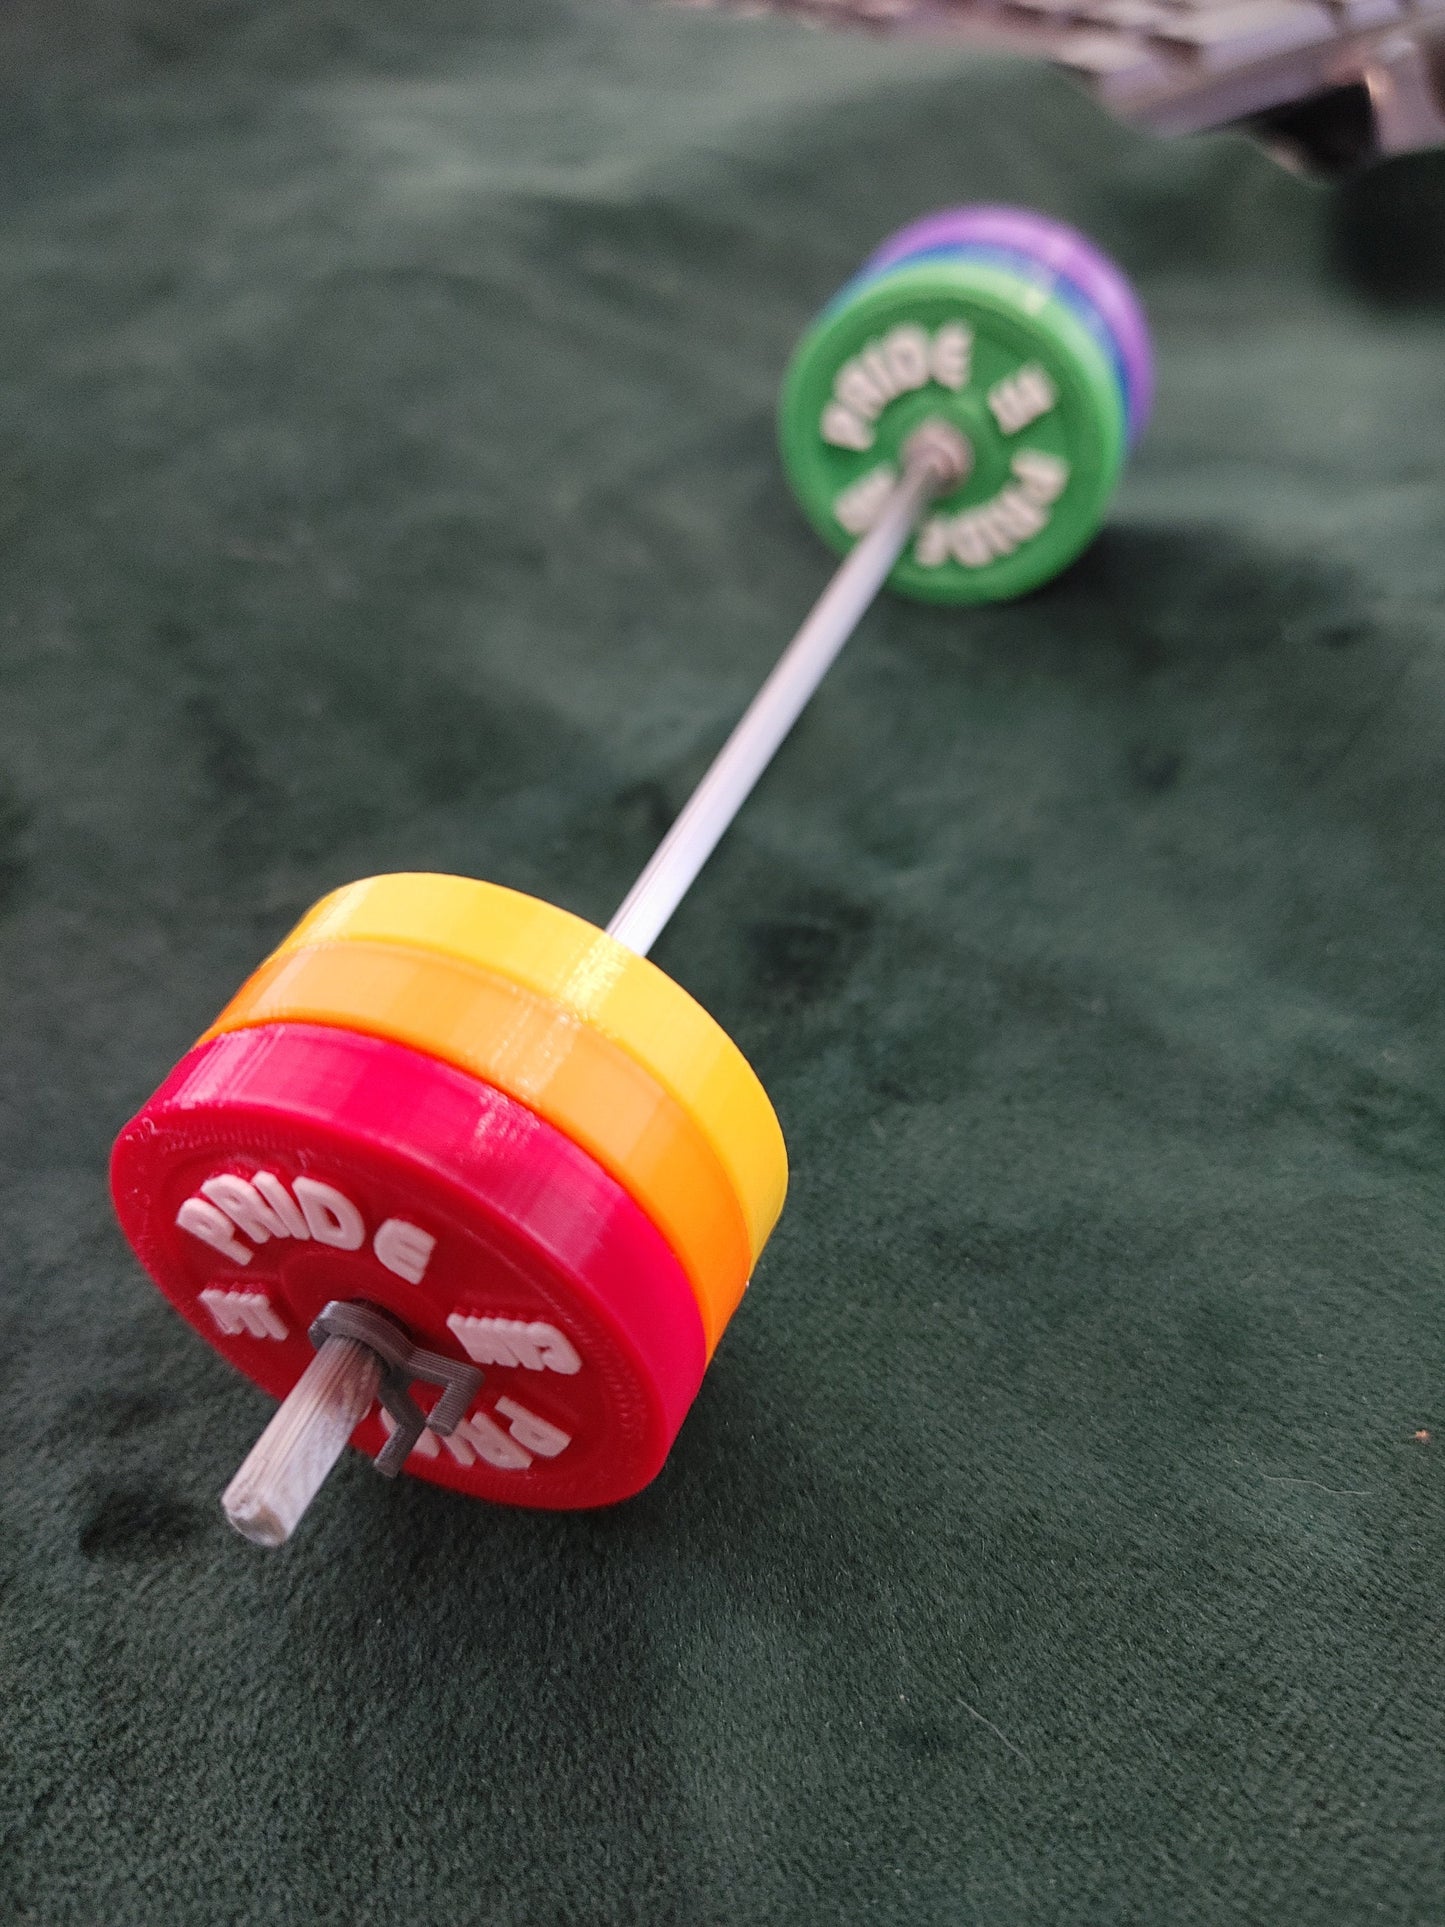 Customizable Event Miniature Barbell, PRIDE gym present for your weightlifter, powerlifter or CrossFit athlete